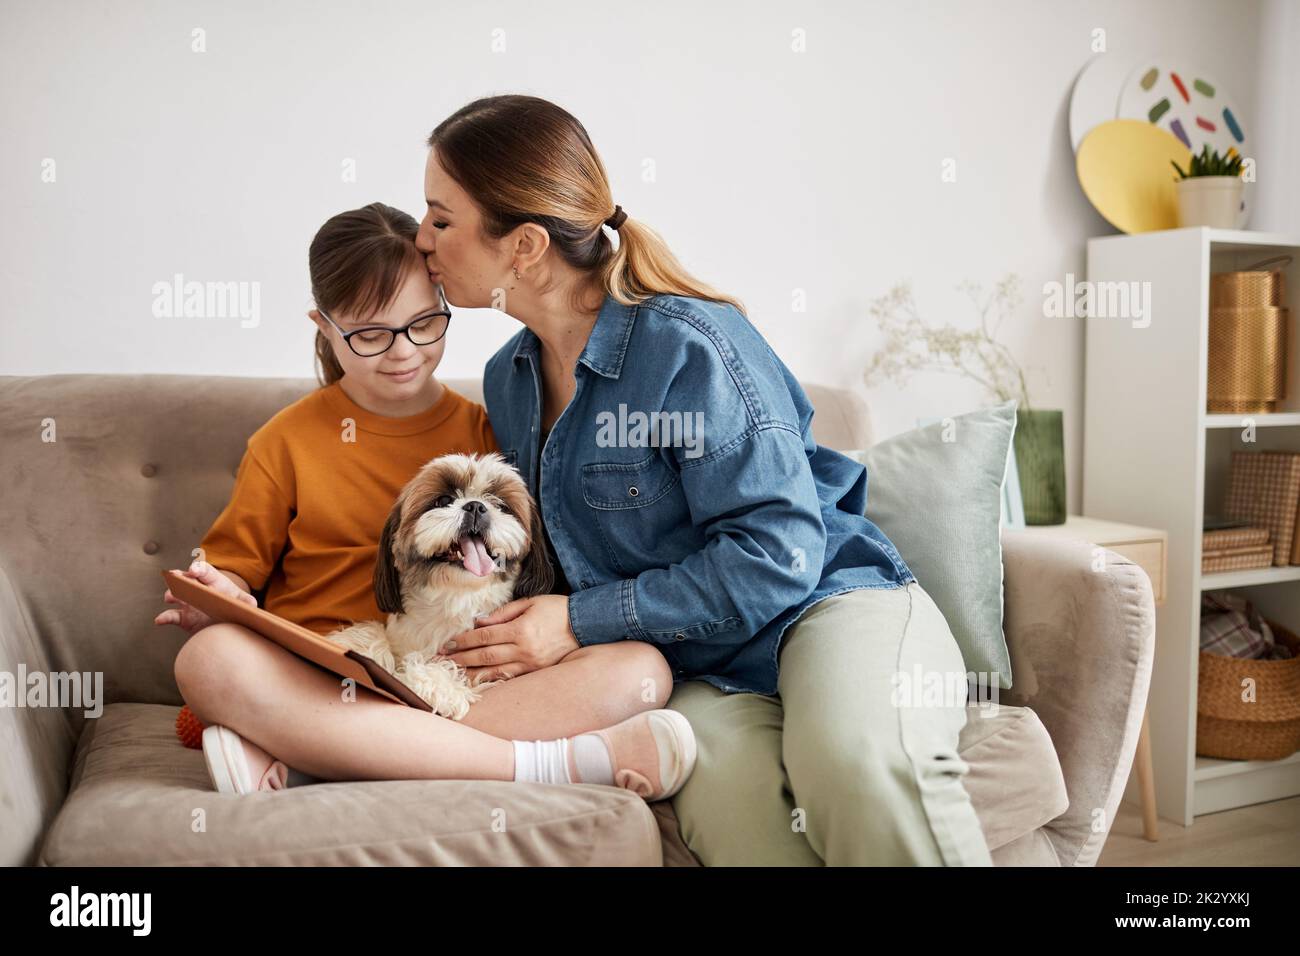 Minimal portrait of loving mother kissing daughter with Down syndrome while sitting on couch at home Stock Photo